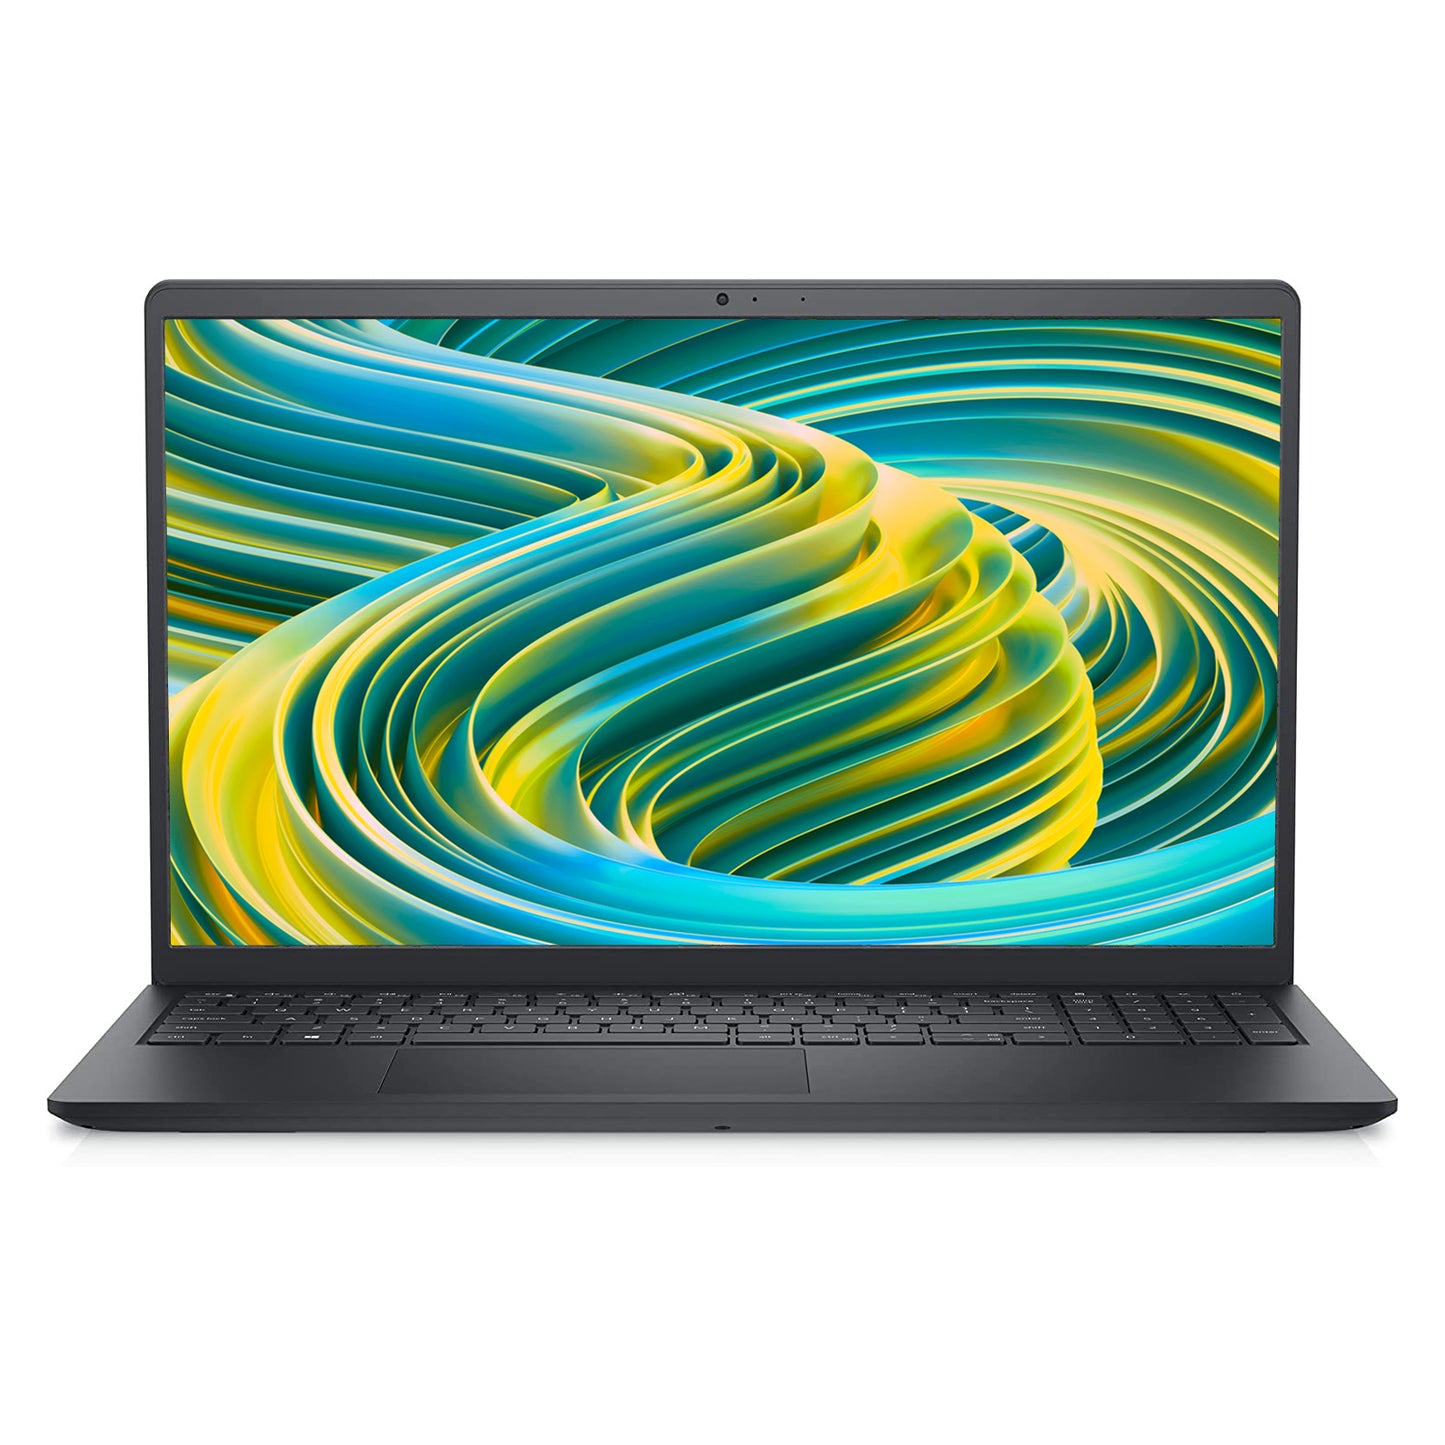 Dell Inspiron 15 3511 Core i5 15.6" Fhd Laptop Offers (New OB)